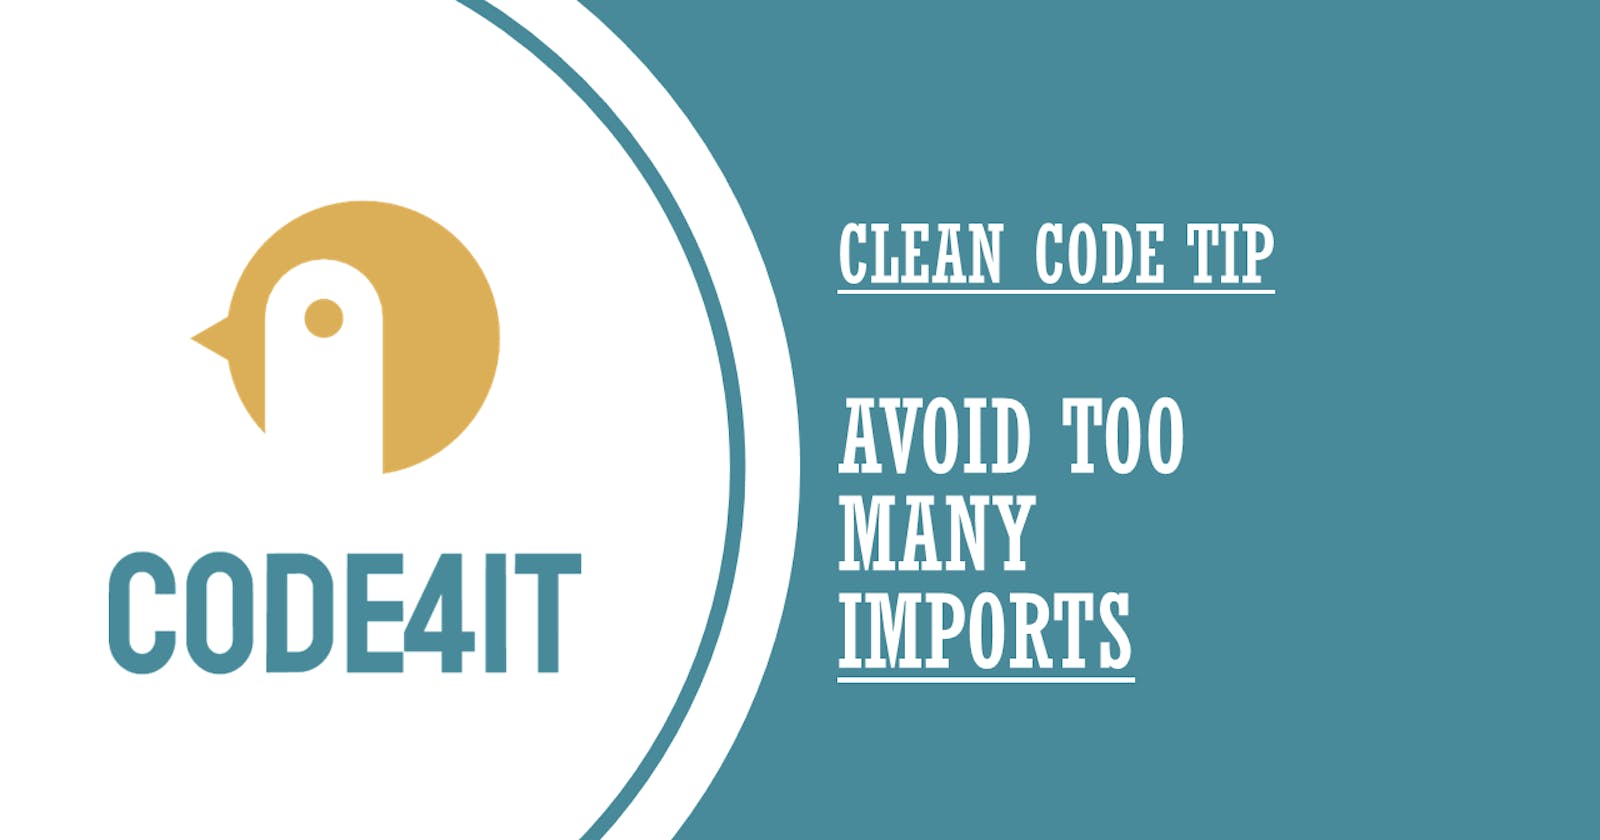 Clean Code Tip: Avoid using too many Imports in your classes